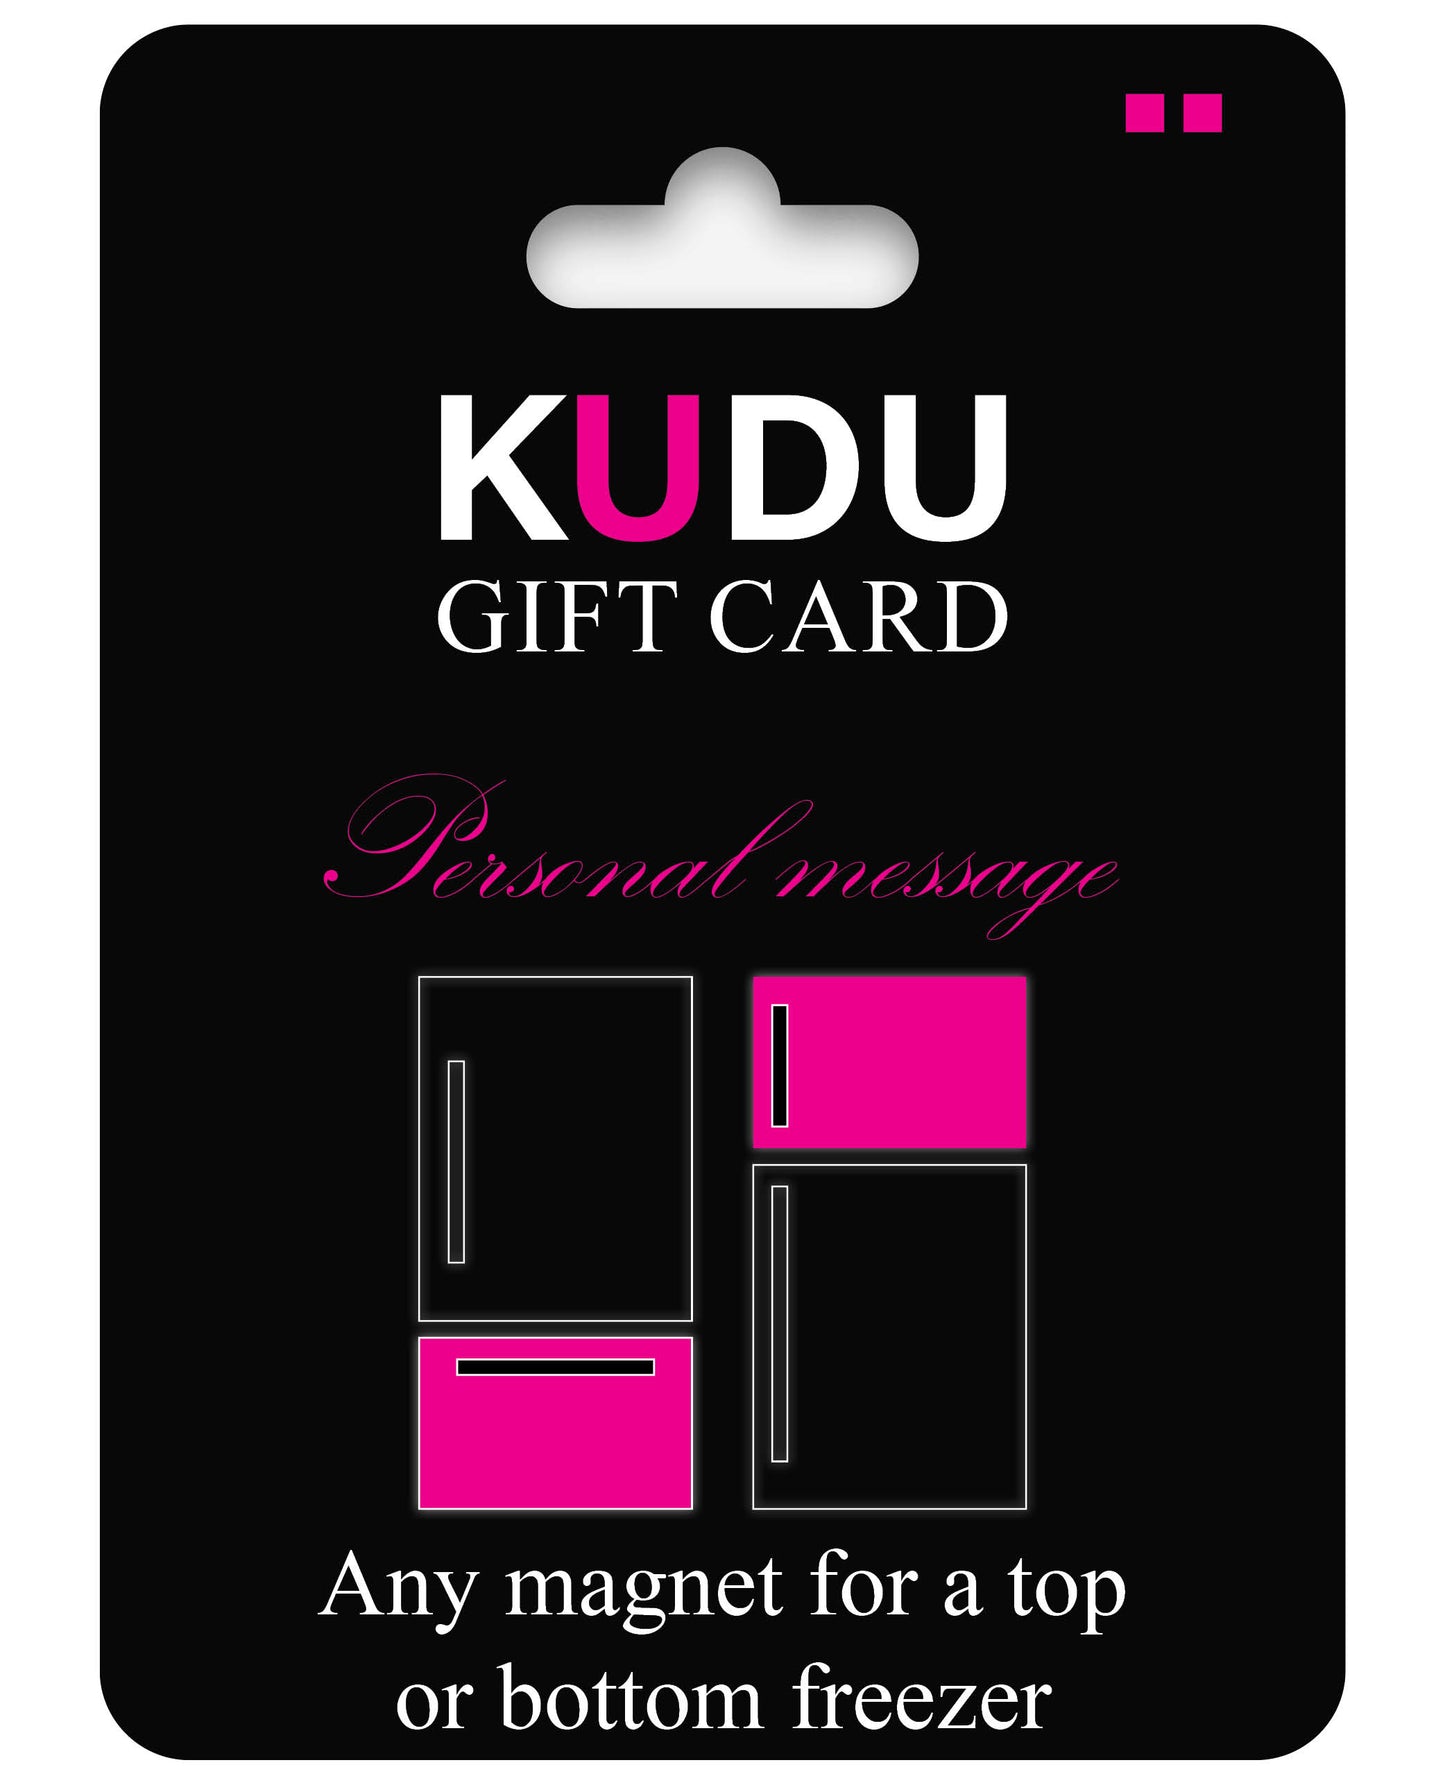 Gift card For any Top or Bottom Freezer Magnet